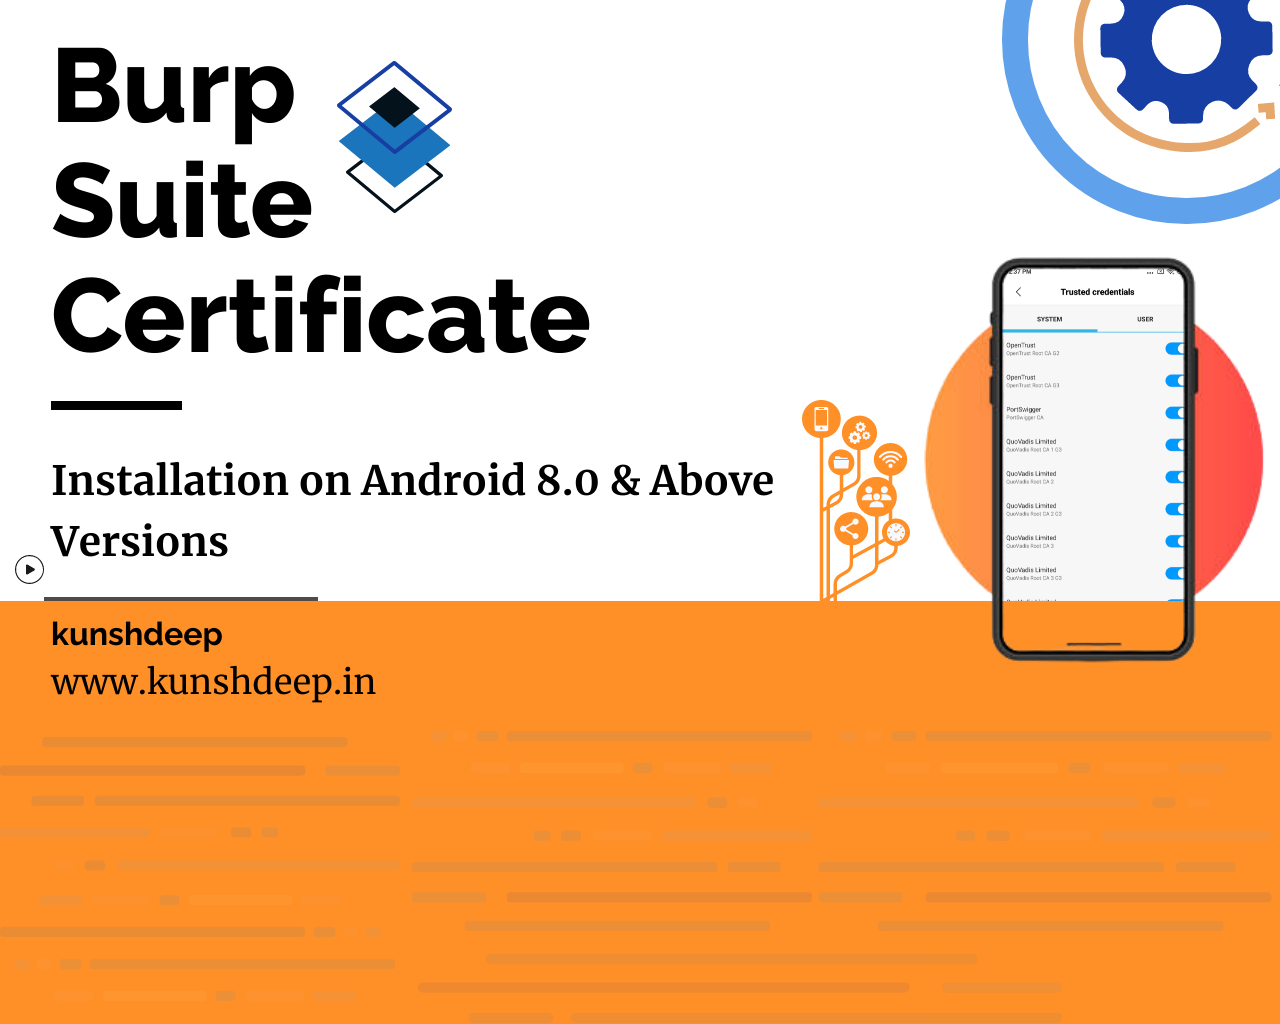 Burp Suite Certificate Installation on Android